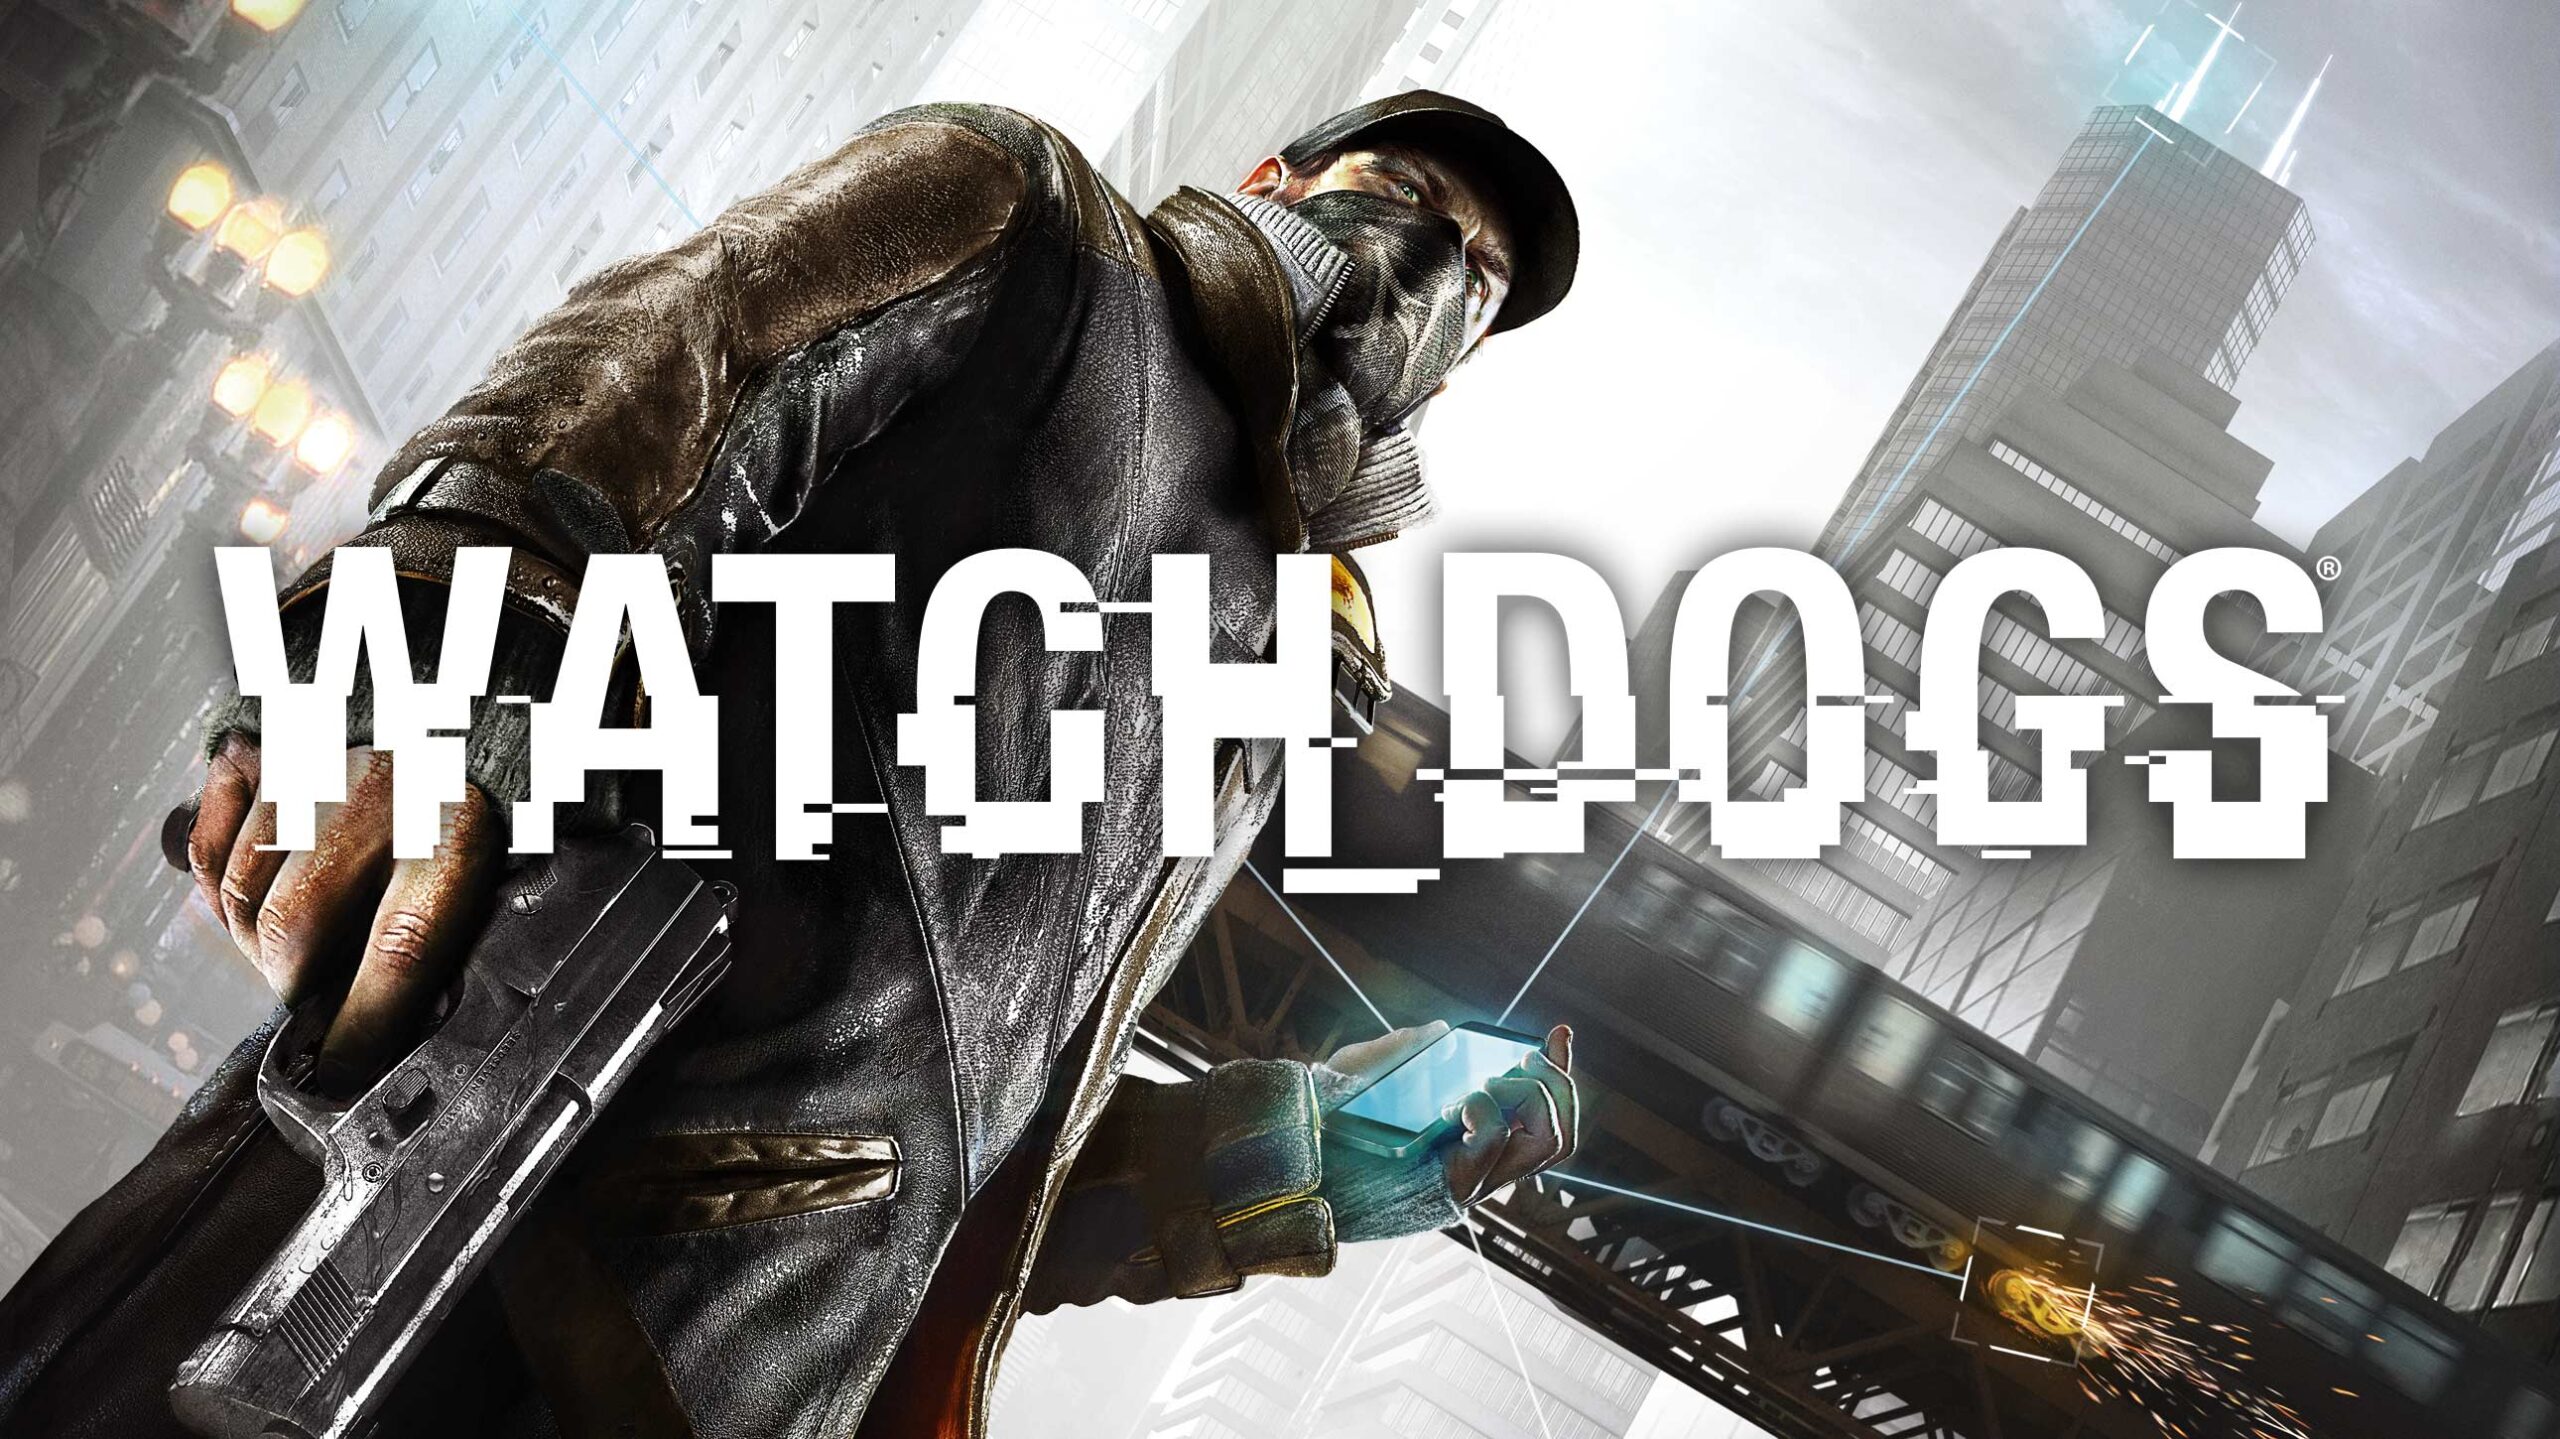 Watch Dogs Free Download PC Game (Full Version)